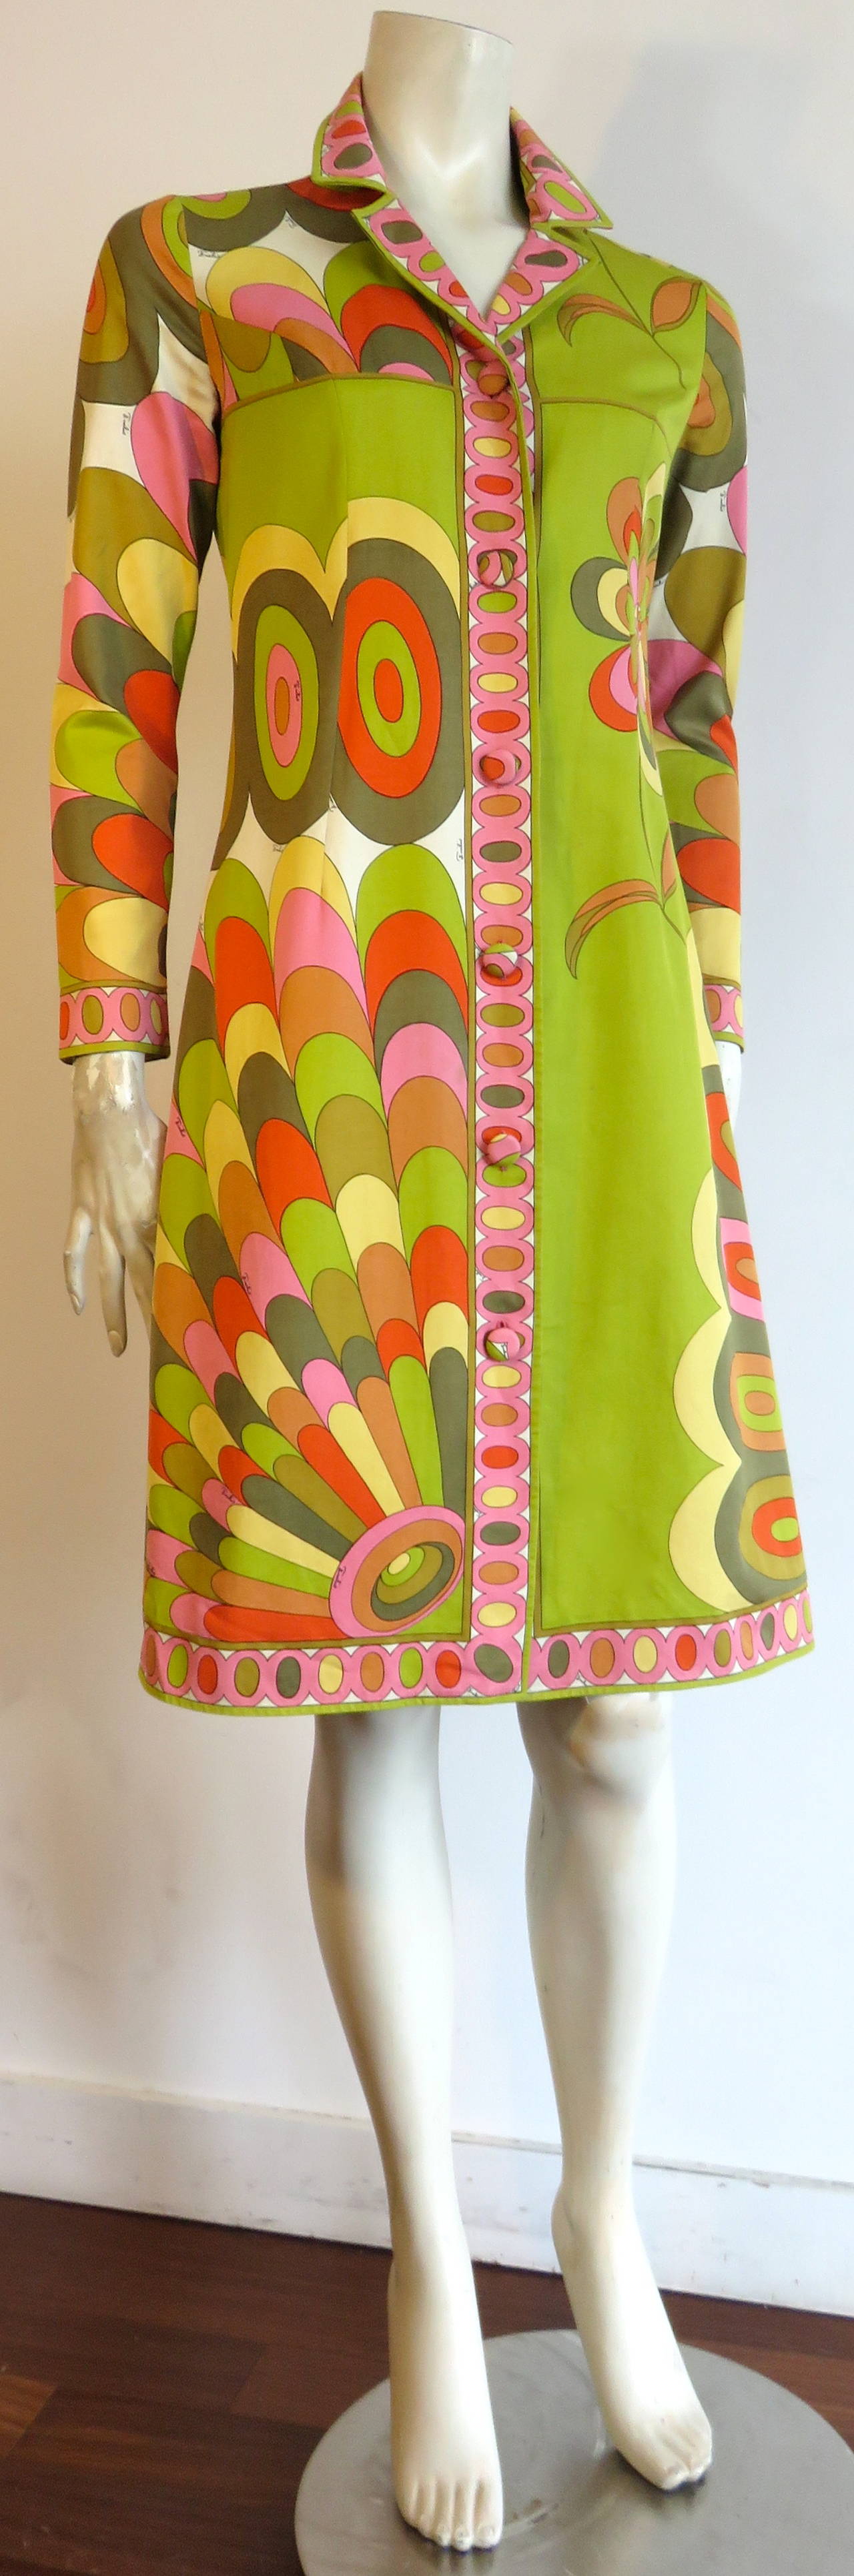 Brilliant, 1960's EMILIO PUCCI, psychedelic floral printed coat.

Multi-color, signed printed artwork onto cotton twill fabrication with self-fabric covered buttons down the front placket.

Spring/Summer weight cotton twill fabrication.

Oval